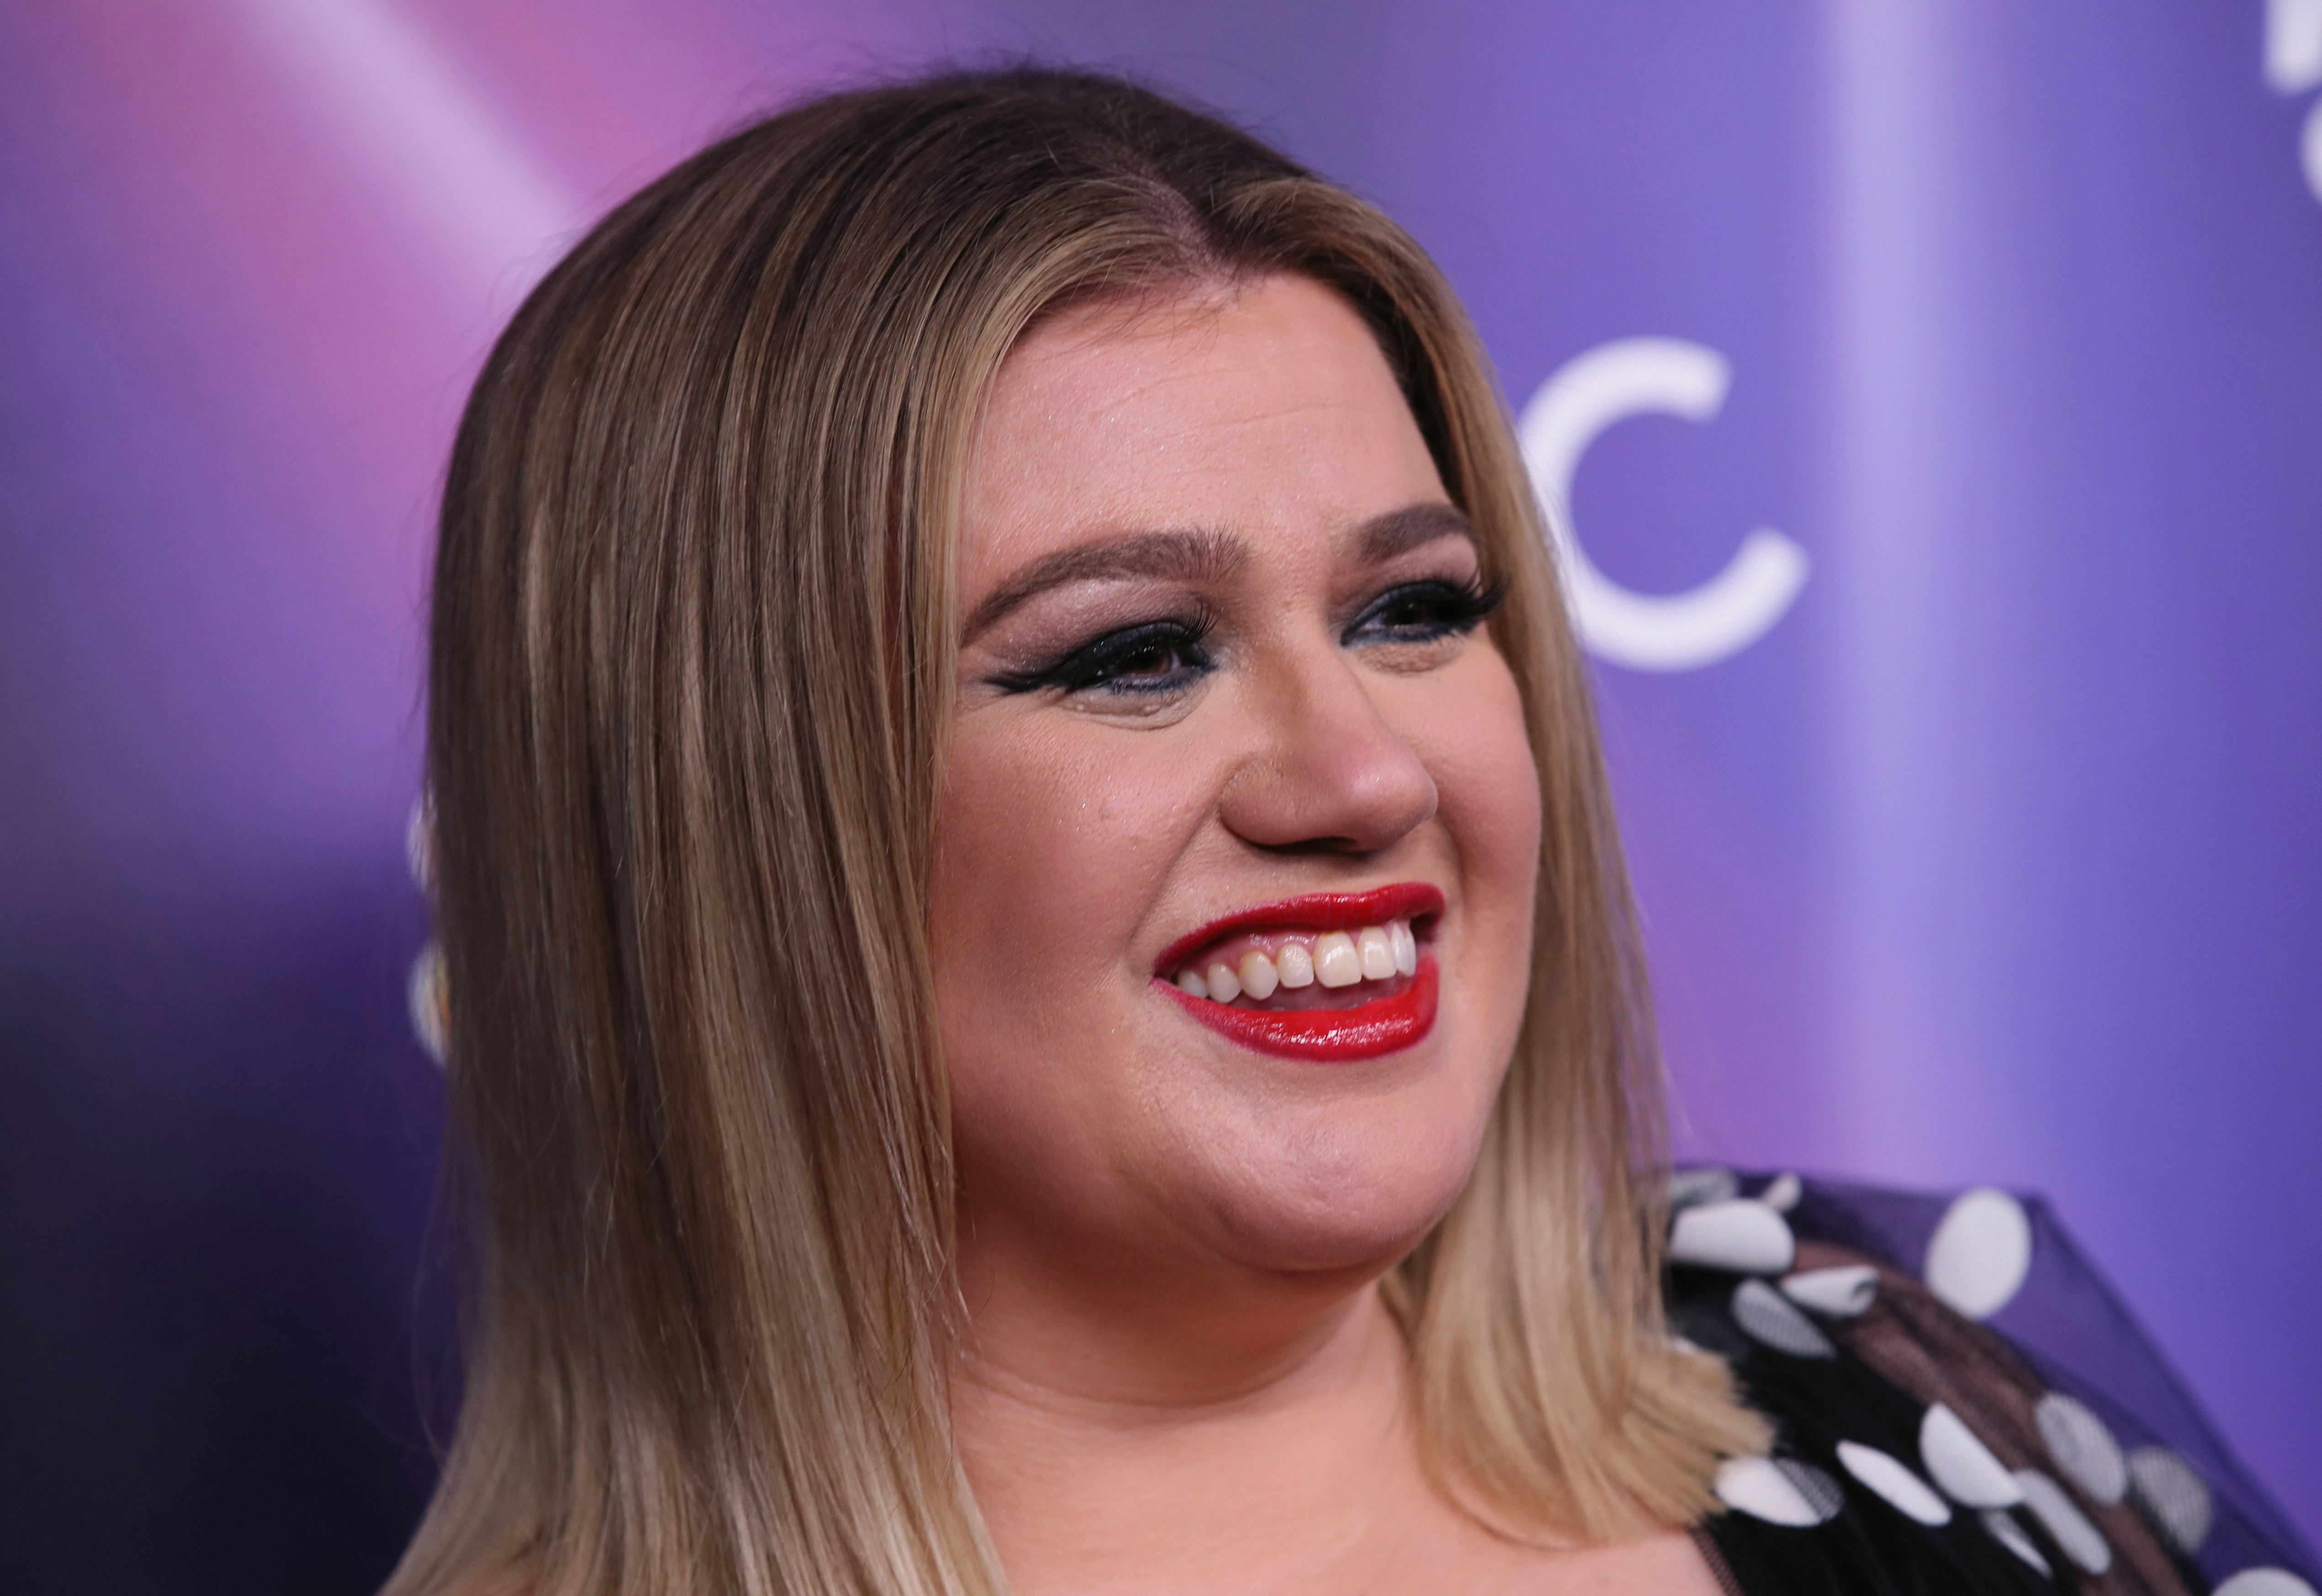 Kelly Clarkson shares what helped her cope with her divorce to Brandon Blackstock.